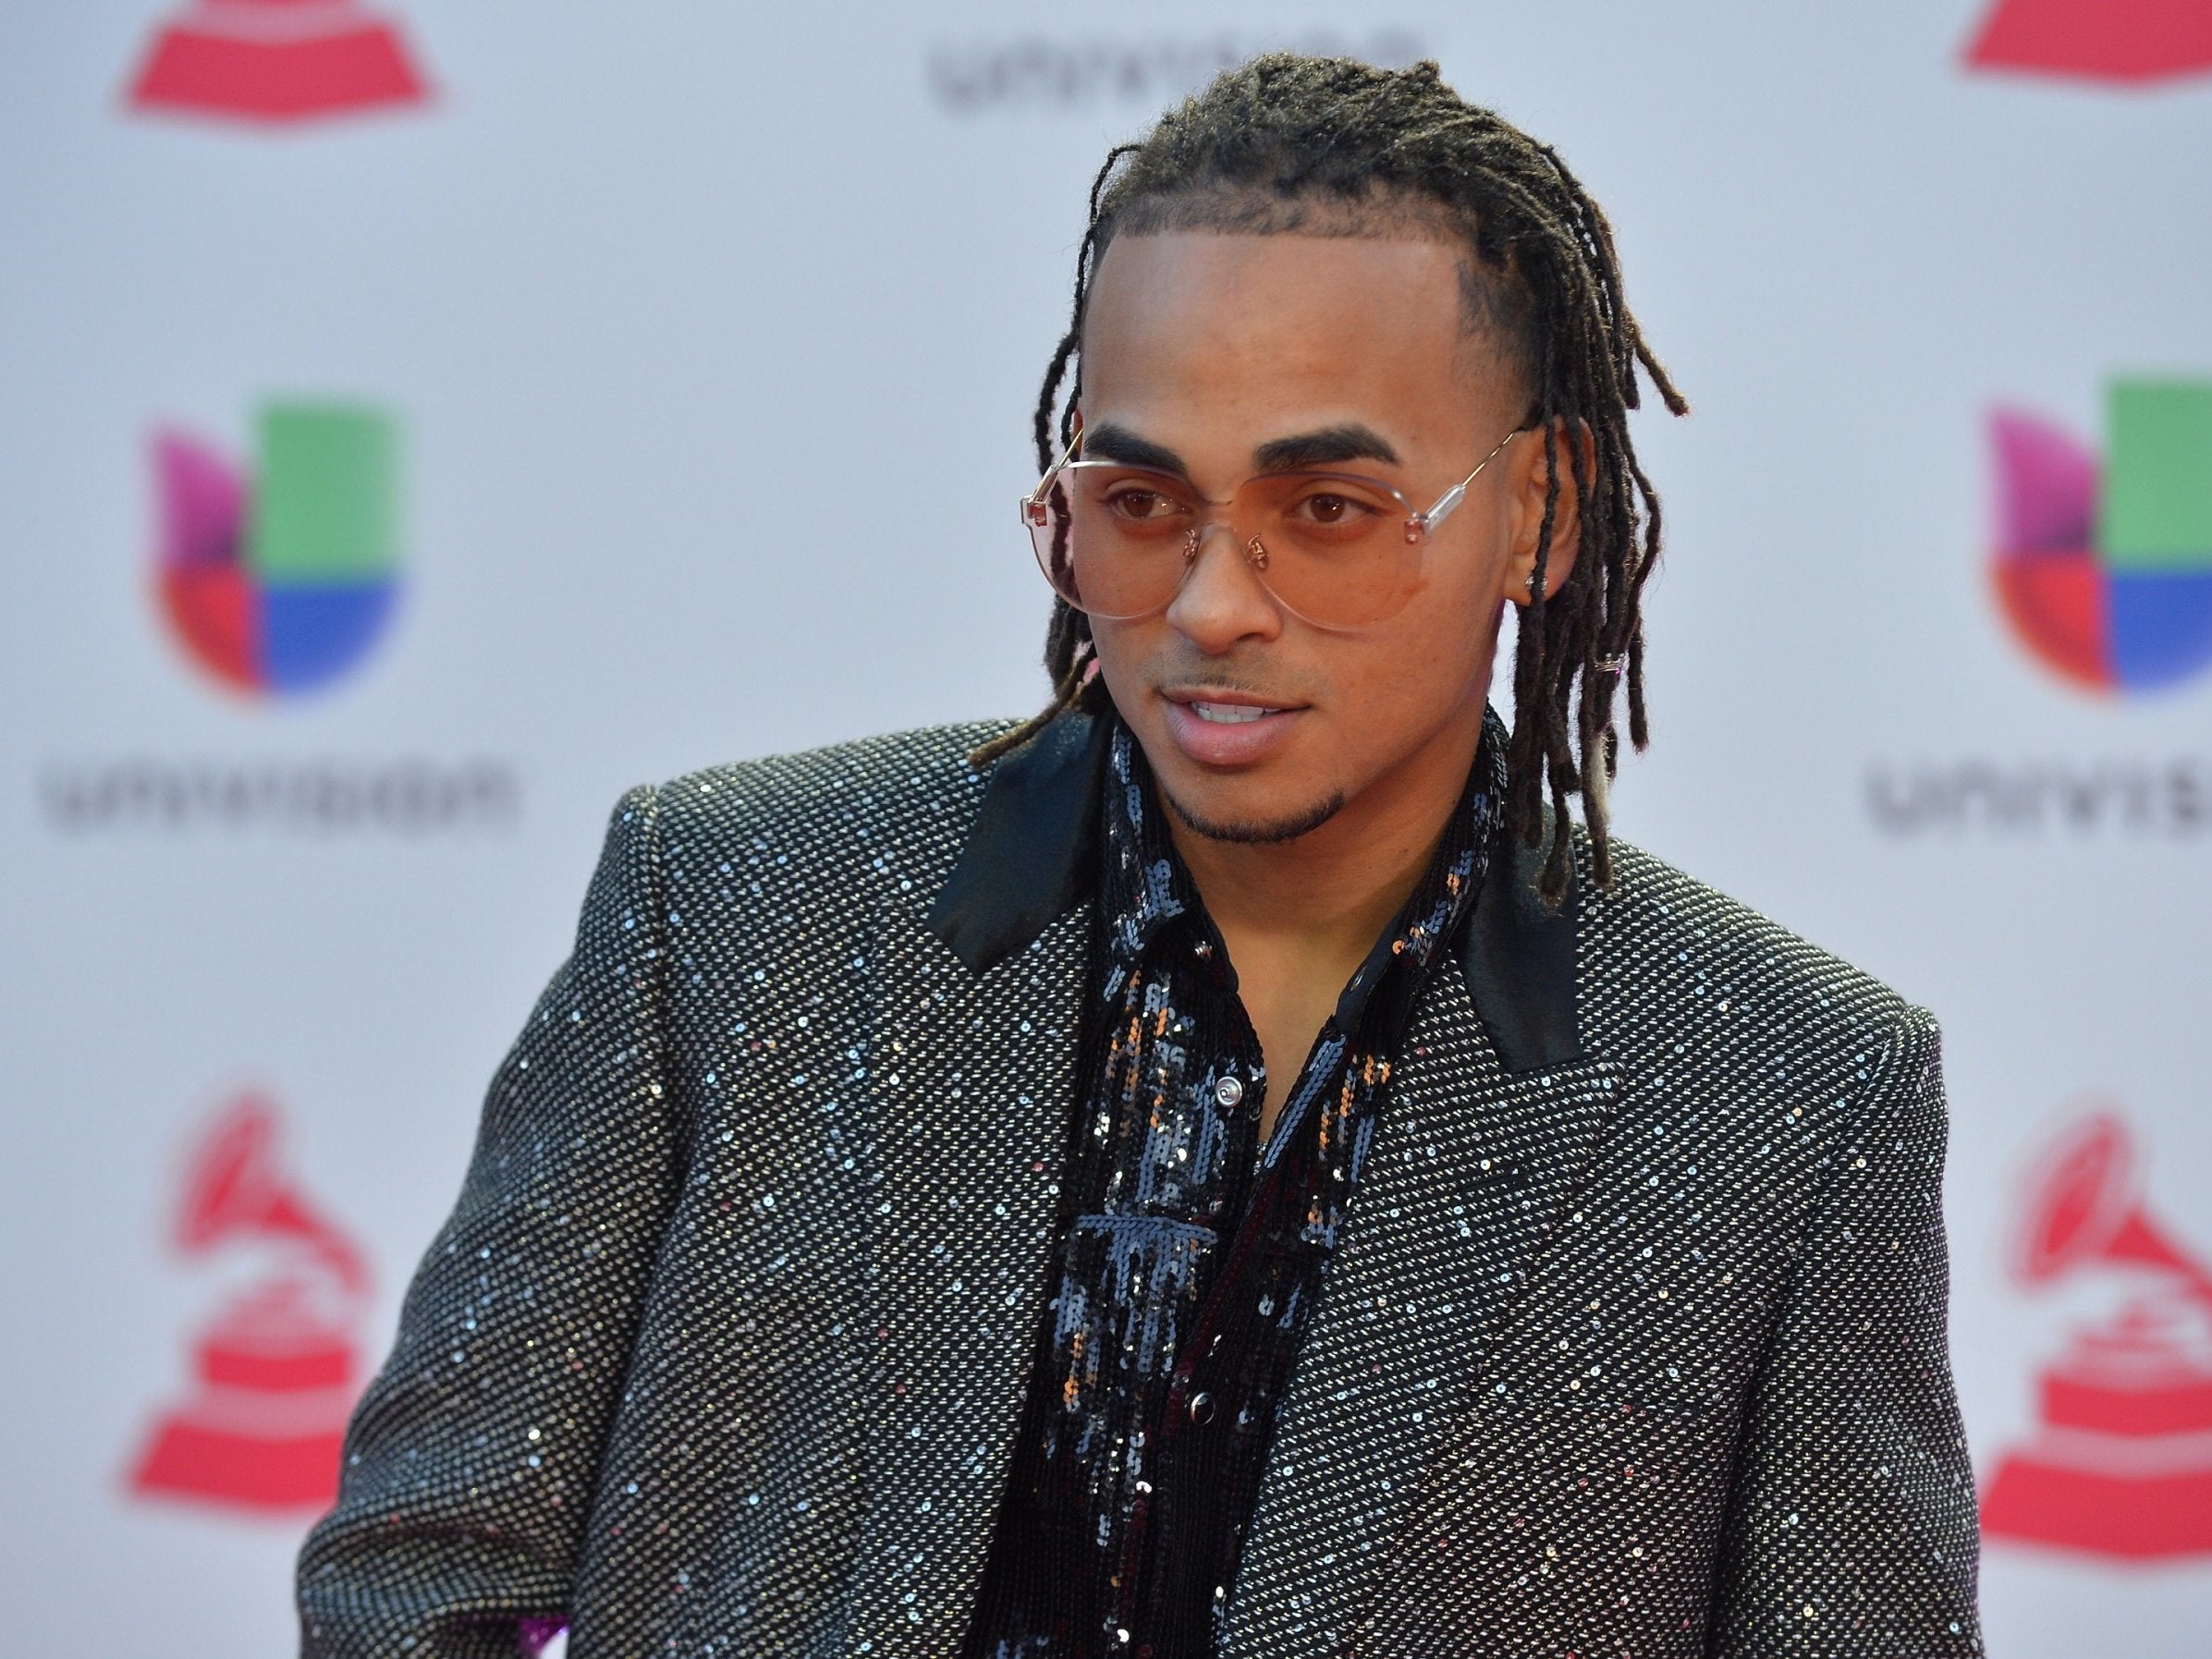 Ozuna Breaks Justin Bieber S Youtube Record Of Number Of Videos With A Billion Views The Independent The Independent